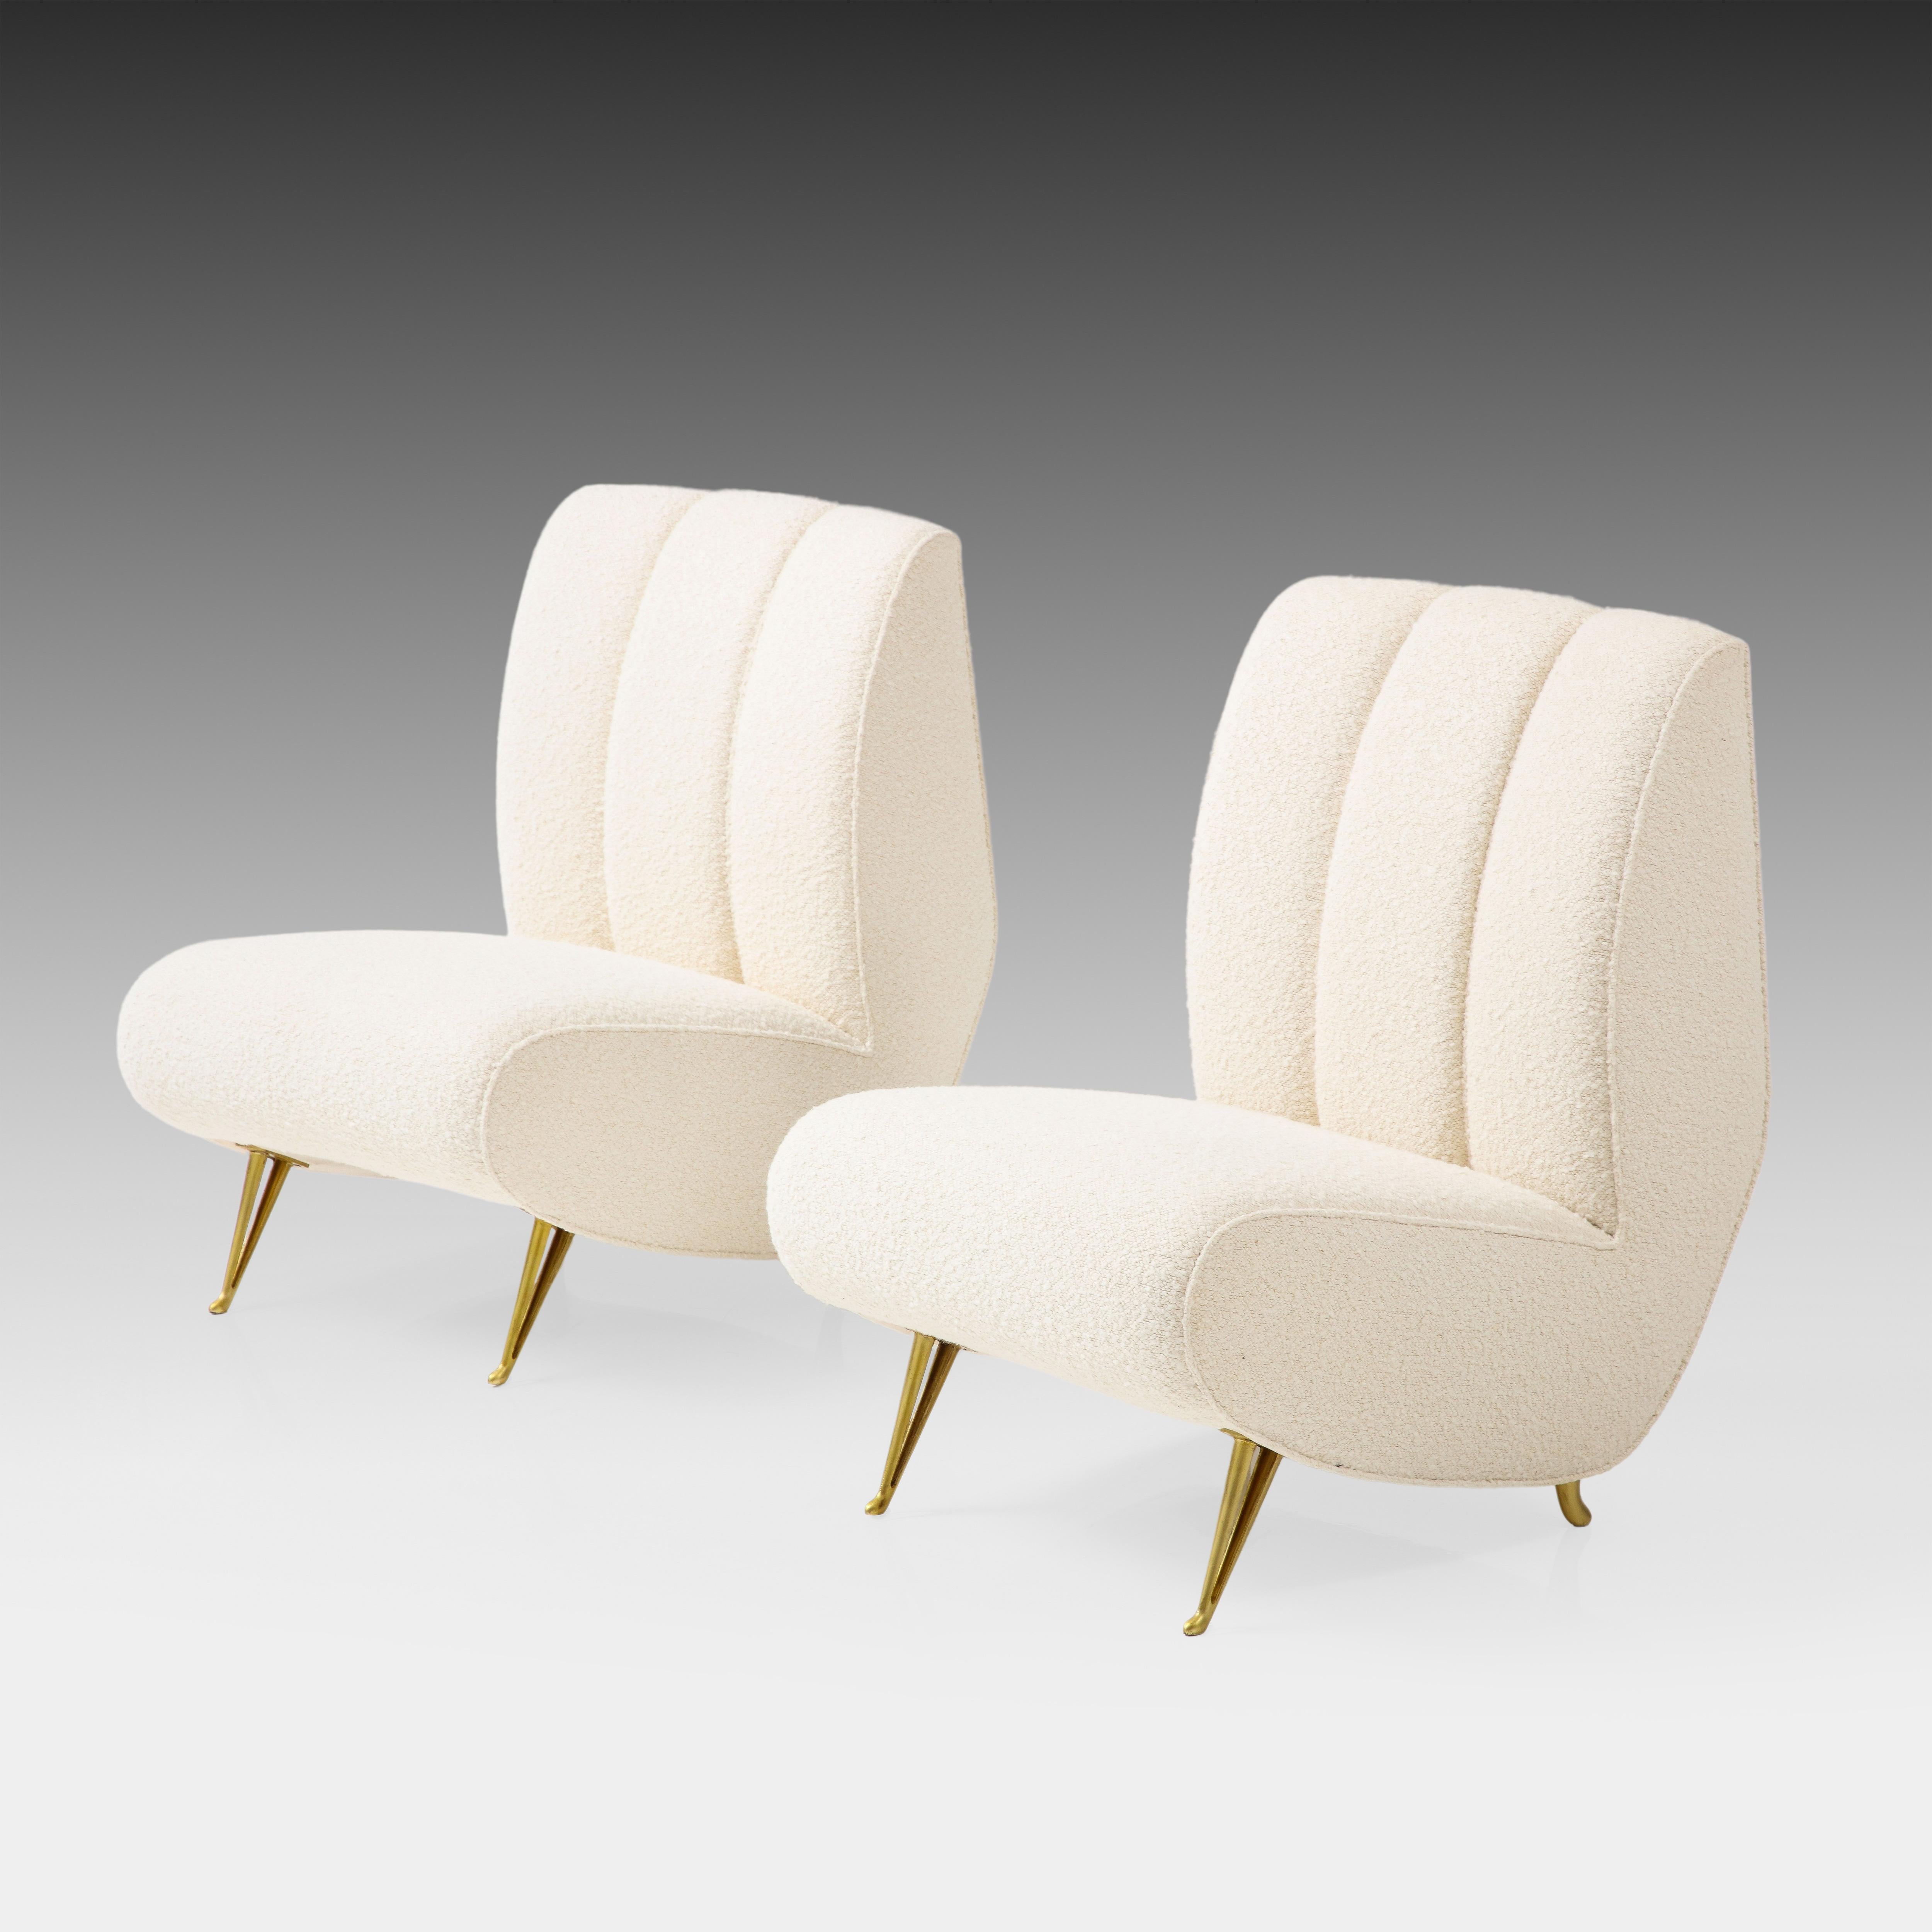 Mid-Century Modern ISA Bergamo Rare Pair of Lounge or Slipper Chairs in Ivory Bouclé, Italy, 1950s For Sale